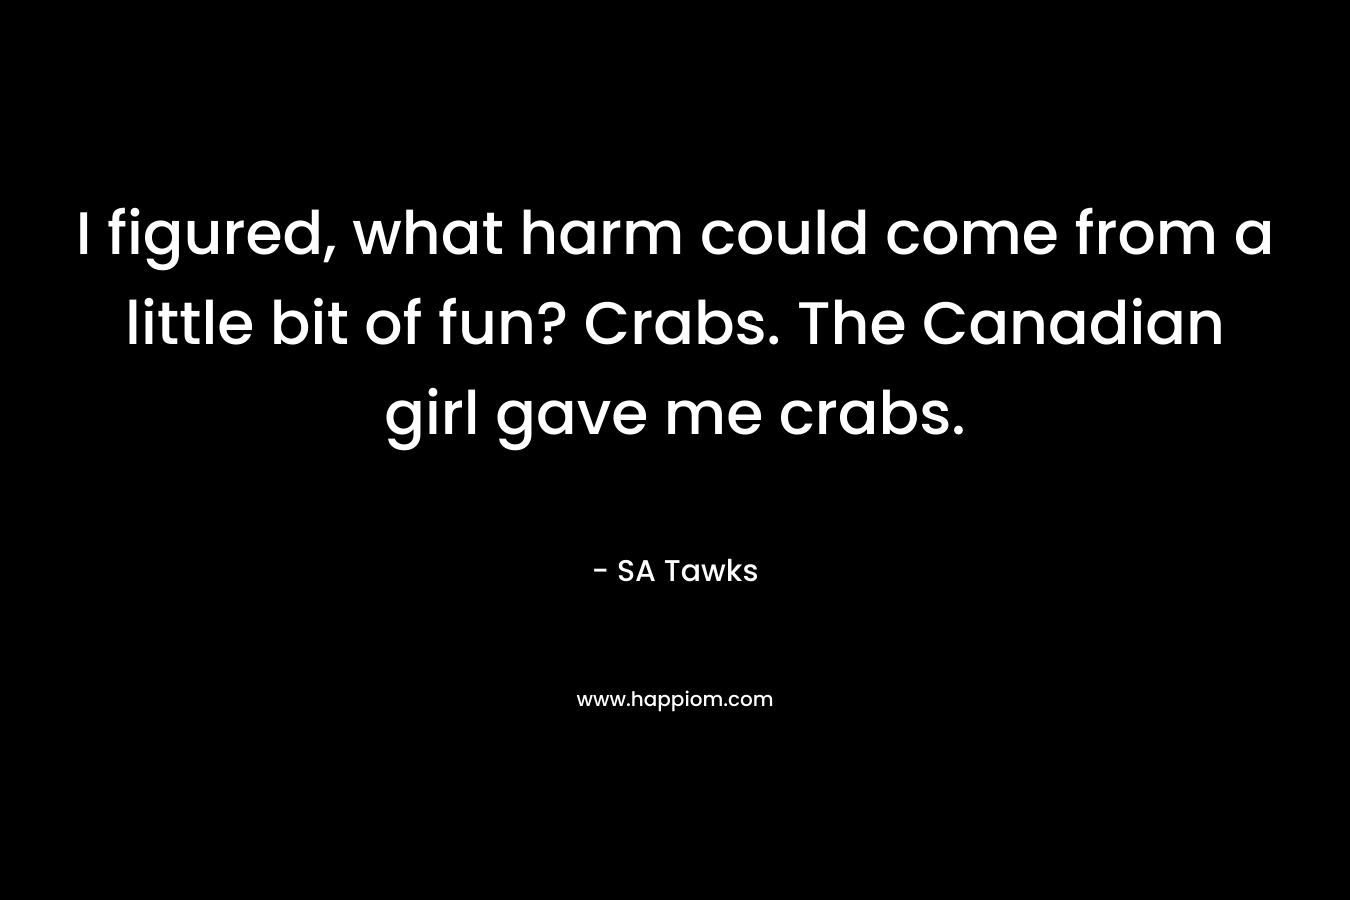 I figured, what harm could come from a little bit of fun? Crabs. The Canadian girl gave me crabs. – SA Tawks